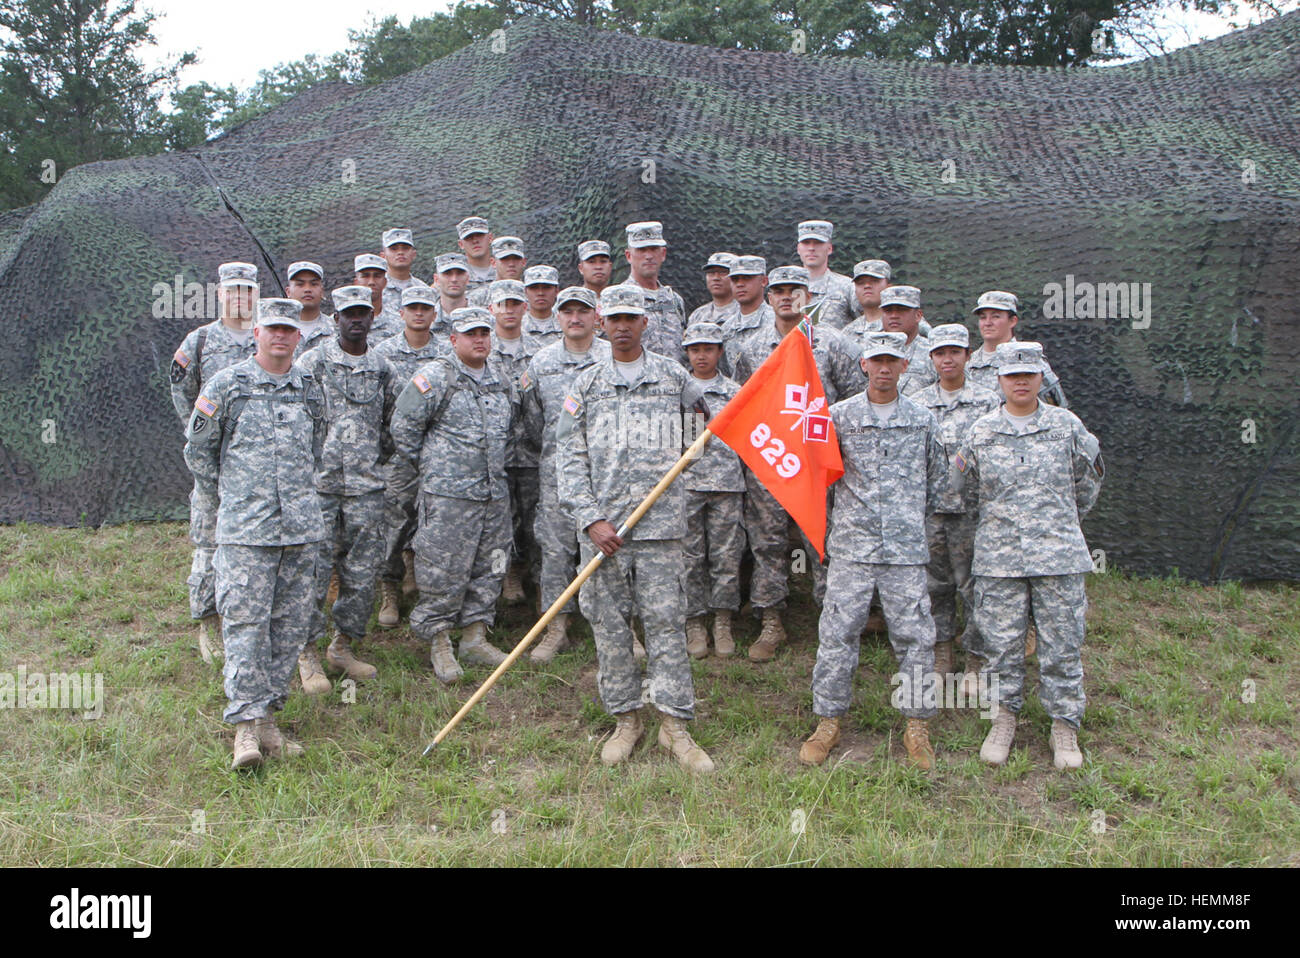 Soldiers from the 829th Signal Company, 303rd Maneuver Enhancement Brigade stand in front of the tactical camouflage netting they had just completed assembling July 14 at Fort McCoy, Wis. The 303rd MEB will be conducting a war exercise, Operation Compass Shield, there July 23-30. (U.S. Army Photo by Spc. David Harthcock) Soldiers of the 829th Signal Company at 2013 WAREX 130714-A-VH612-389 Stock Photo